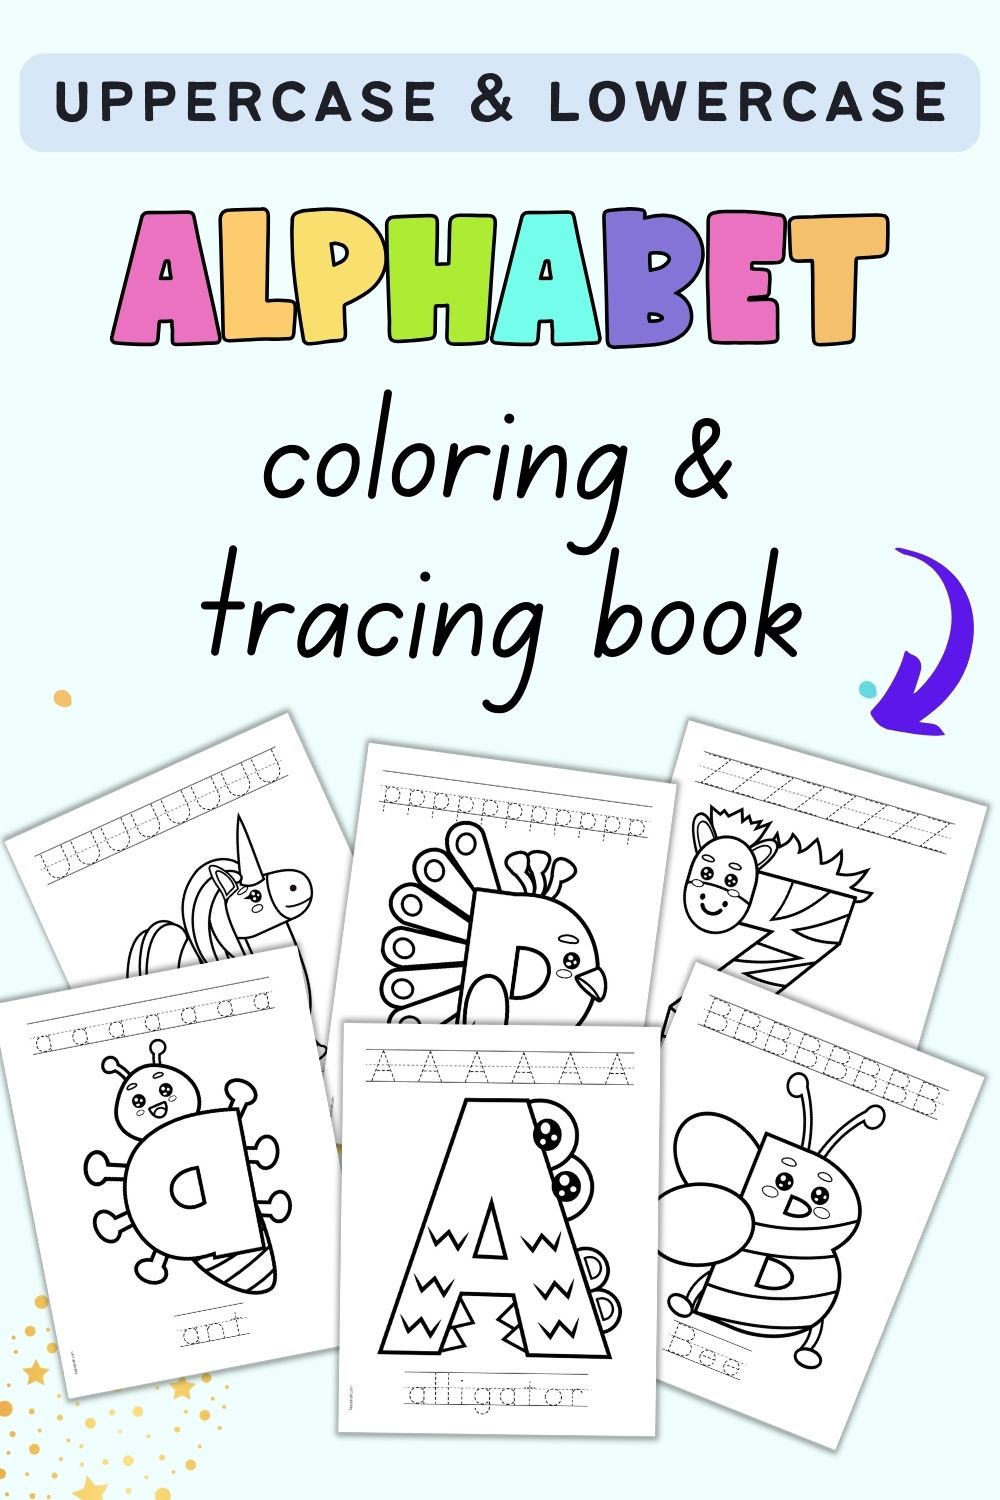 Text "uppercase and lowercase alphabet coloring and tracing book" with a preview of six alphabet tracing pages